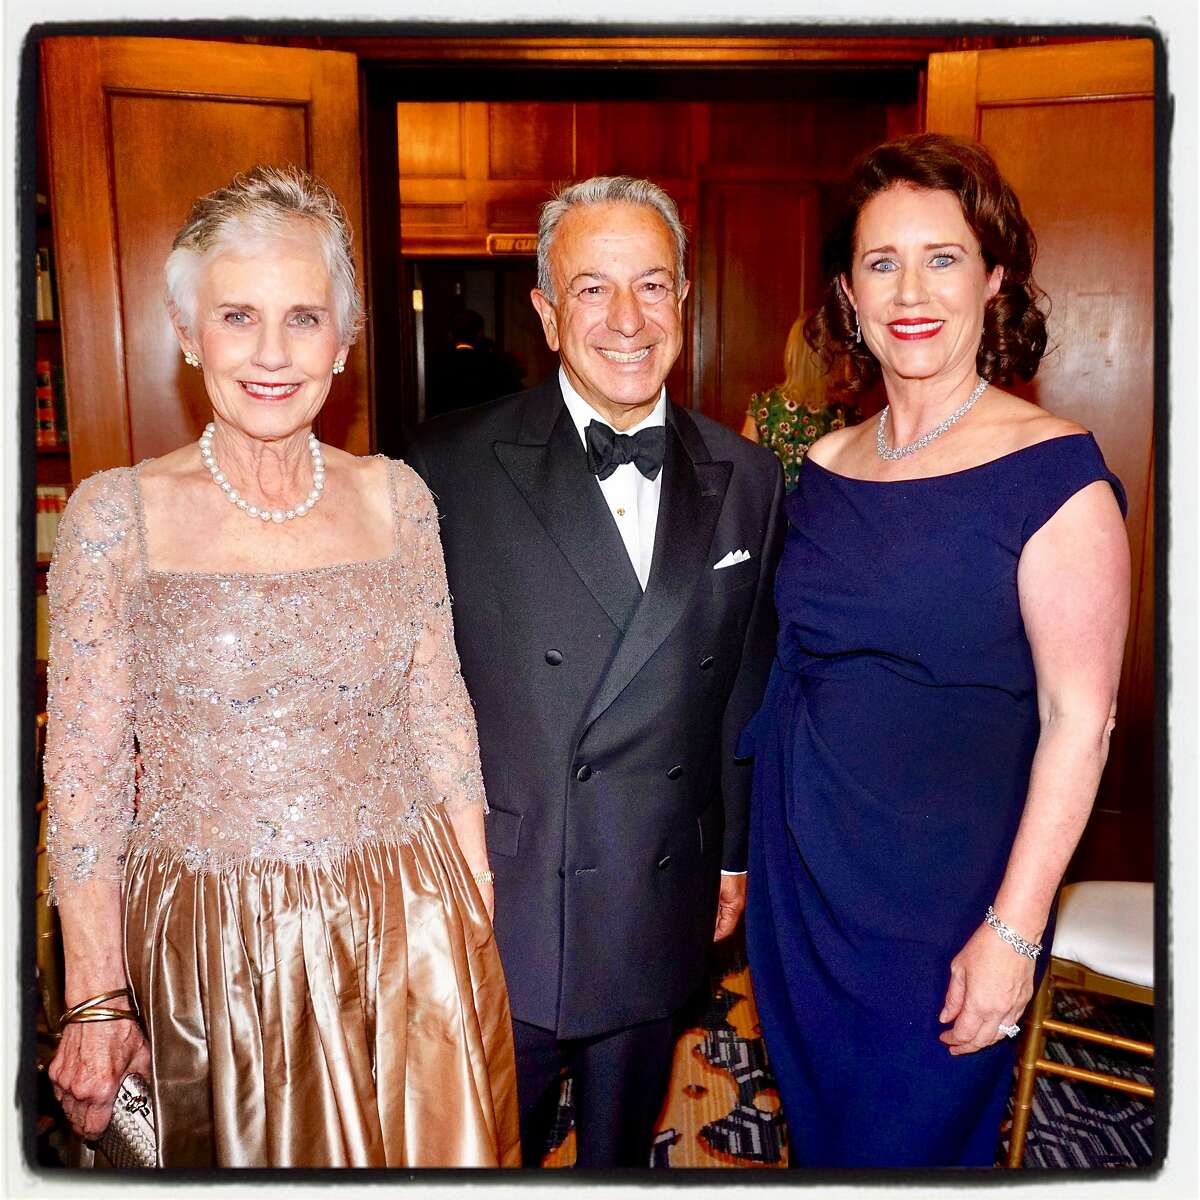 Saroyan Foundation chairman Haig Mardikian with his wife, Connie (at left) and sister-in-law Stacy Case. June 2018.